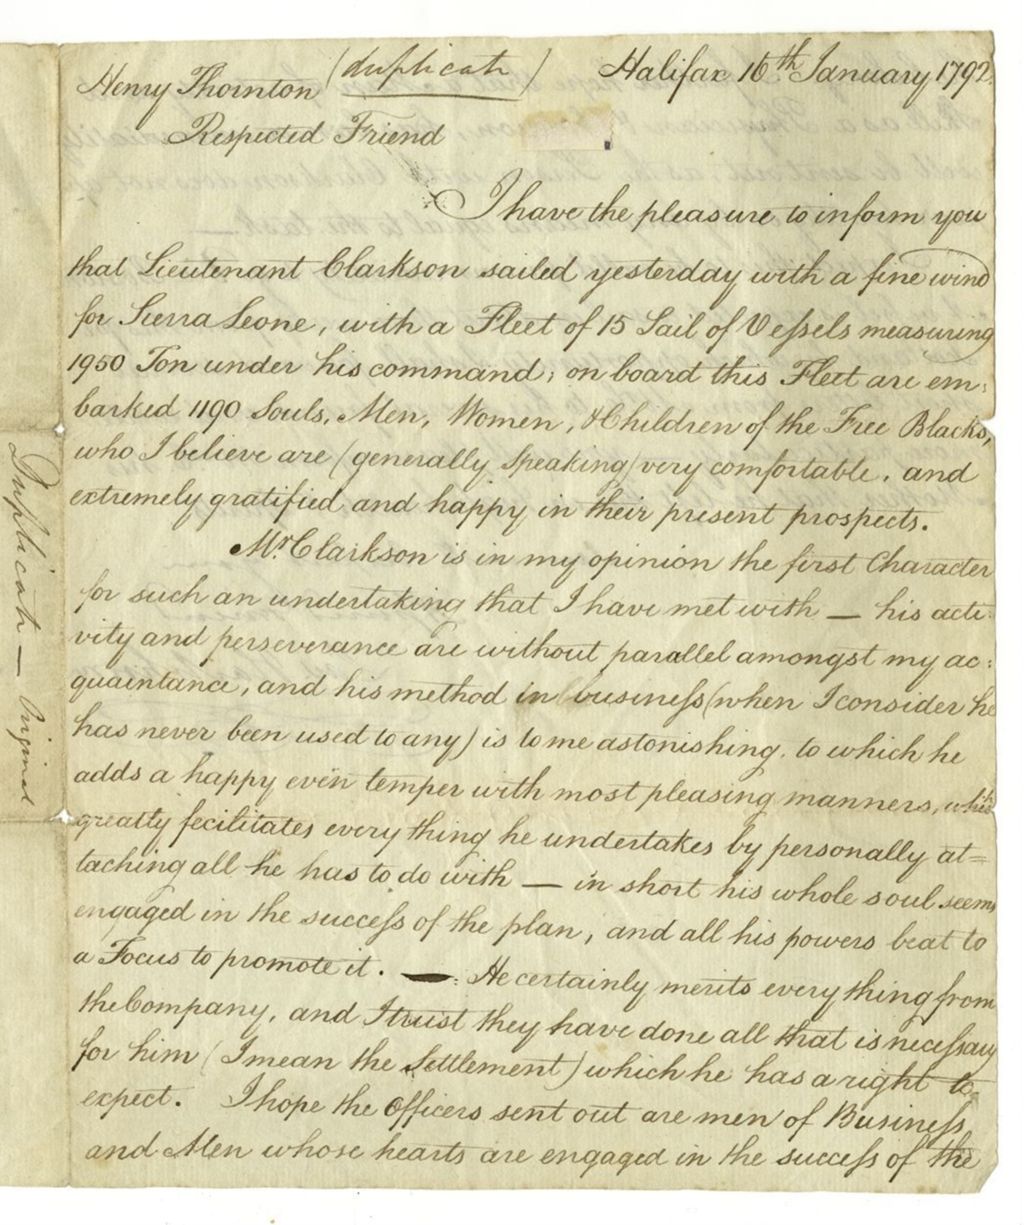 Miniature of Letter from Lawrence Hartshorne to Henry Thornton